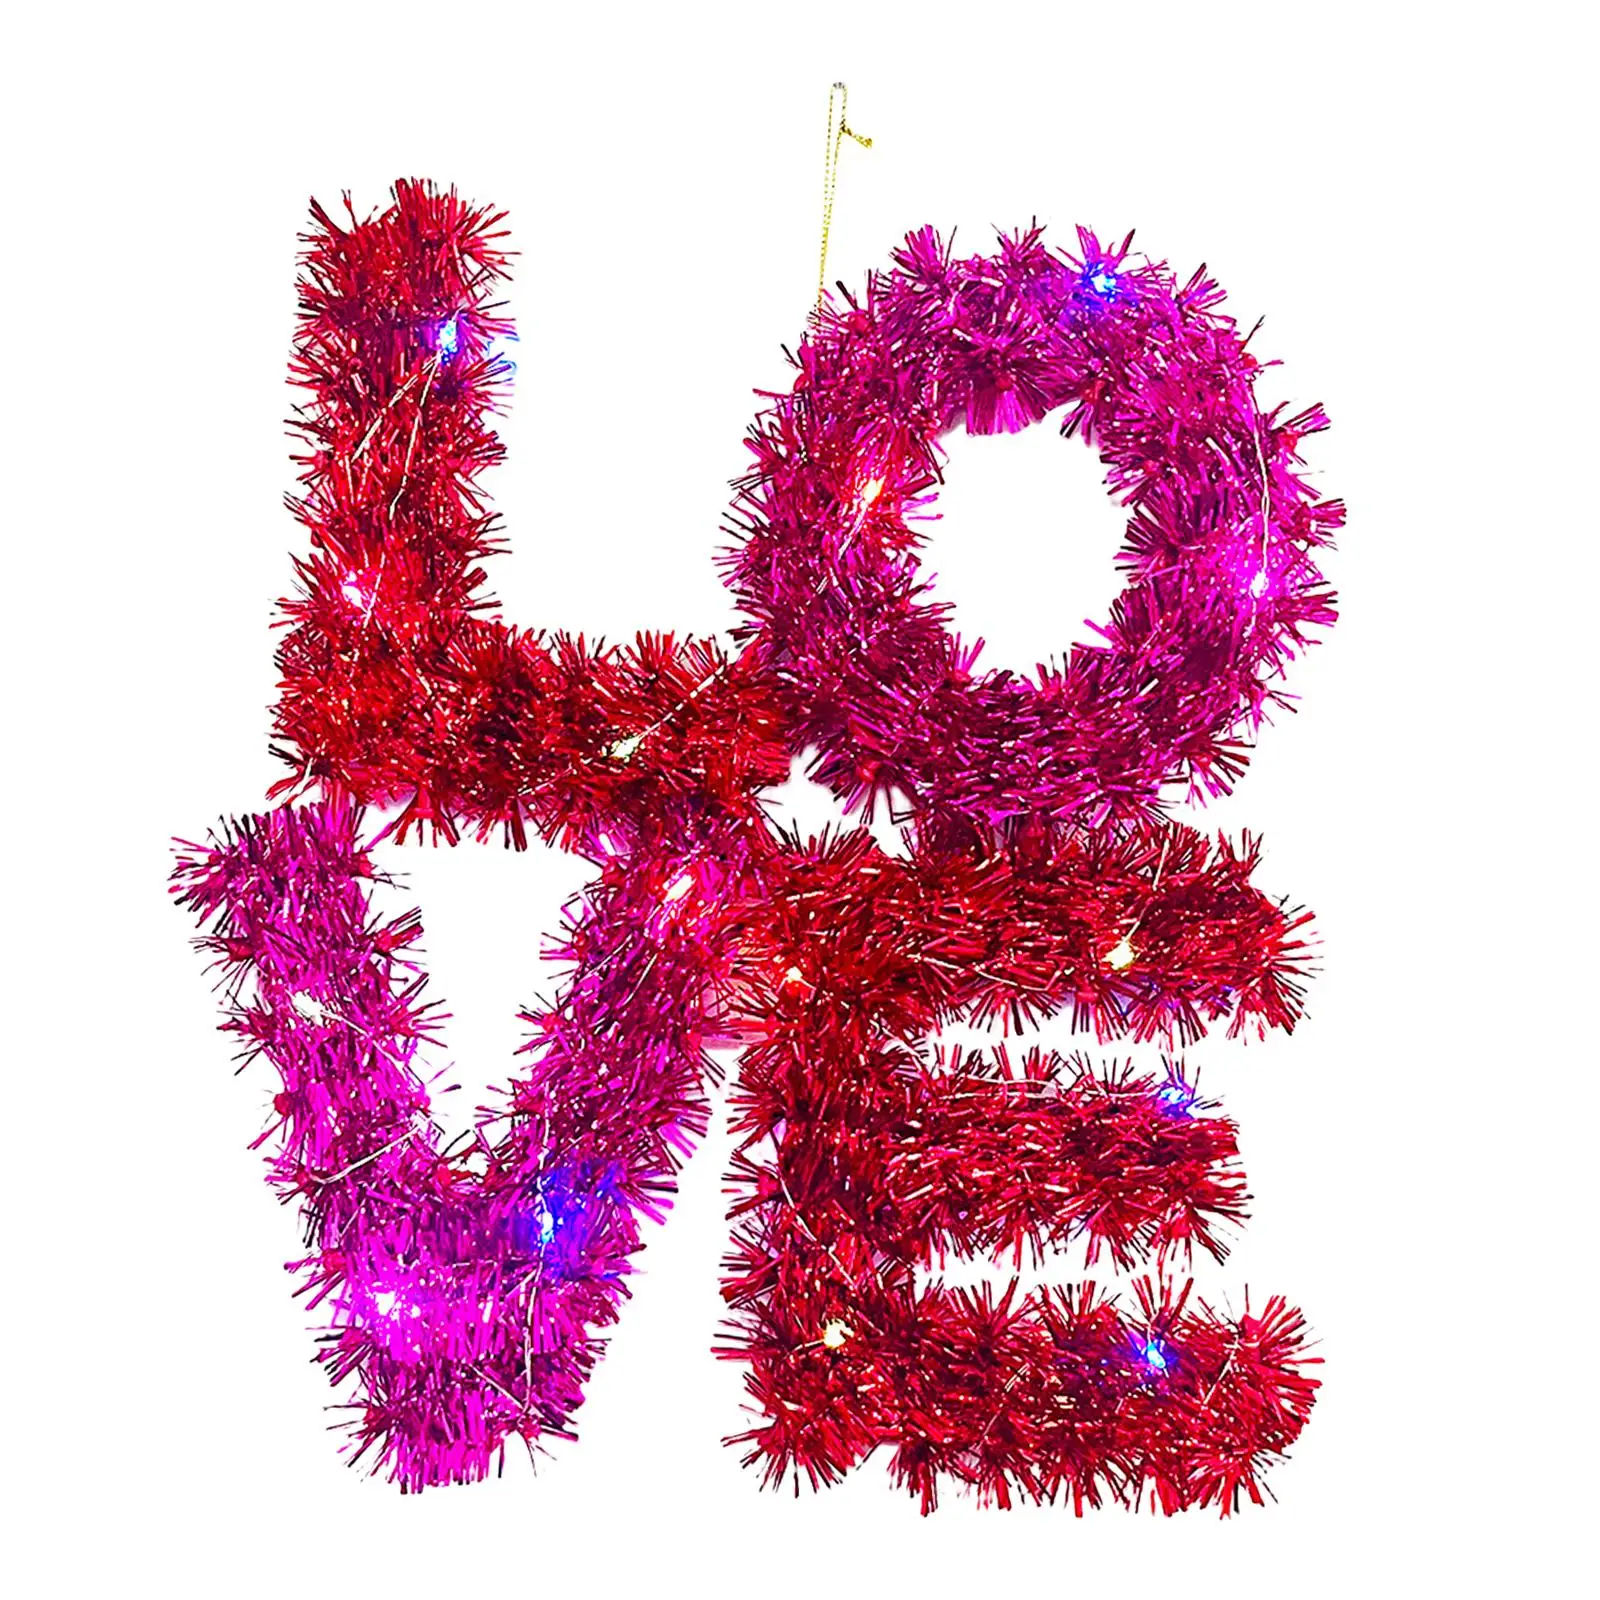 Love Sign with Light Hanging Decoration Ornament for Anniversary Indoor Door